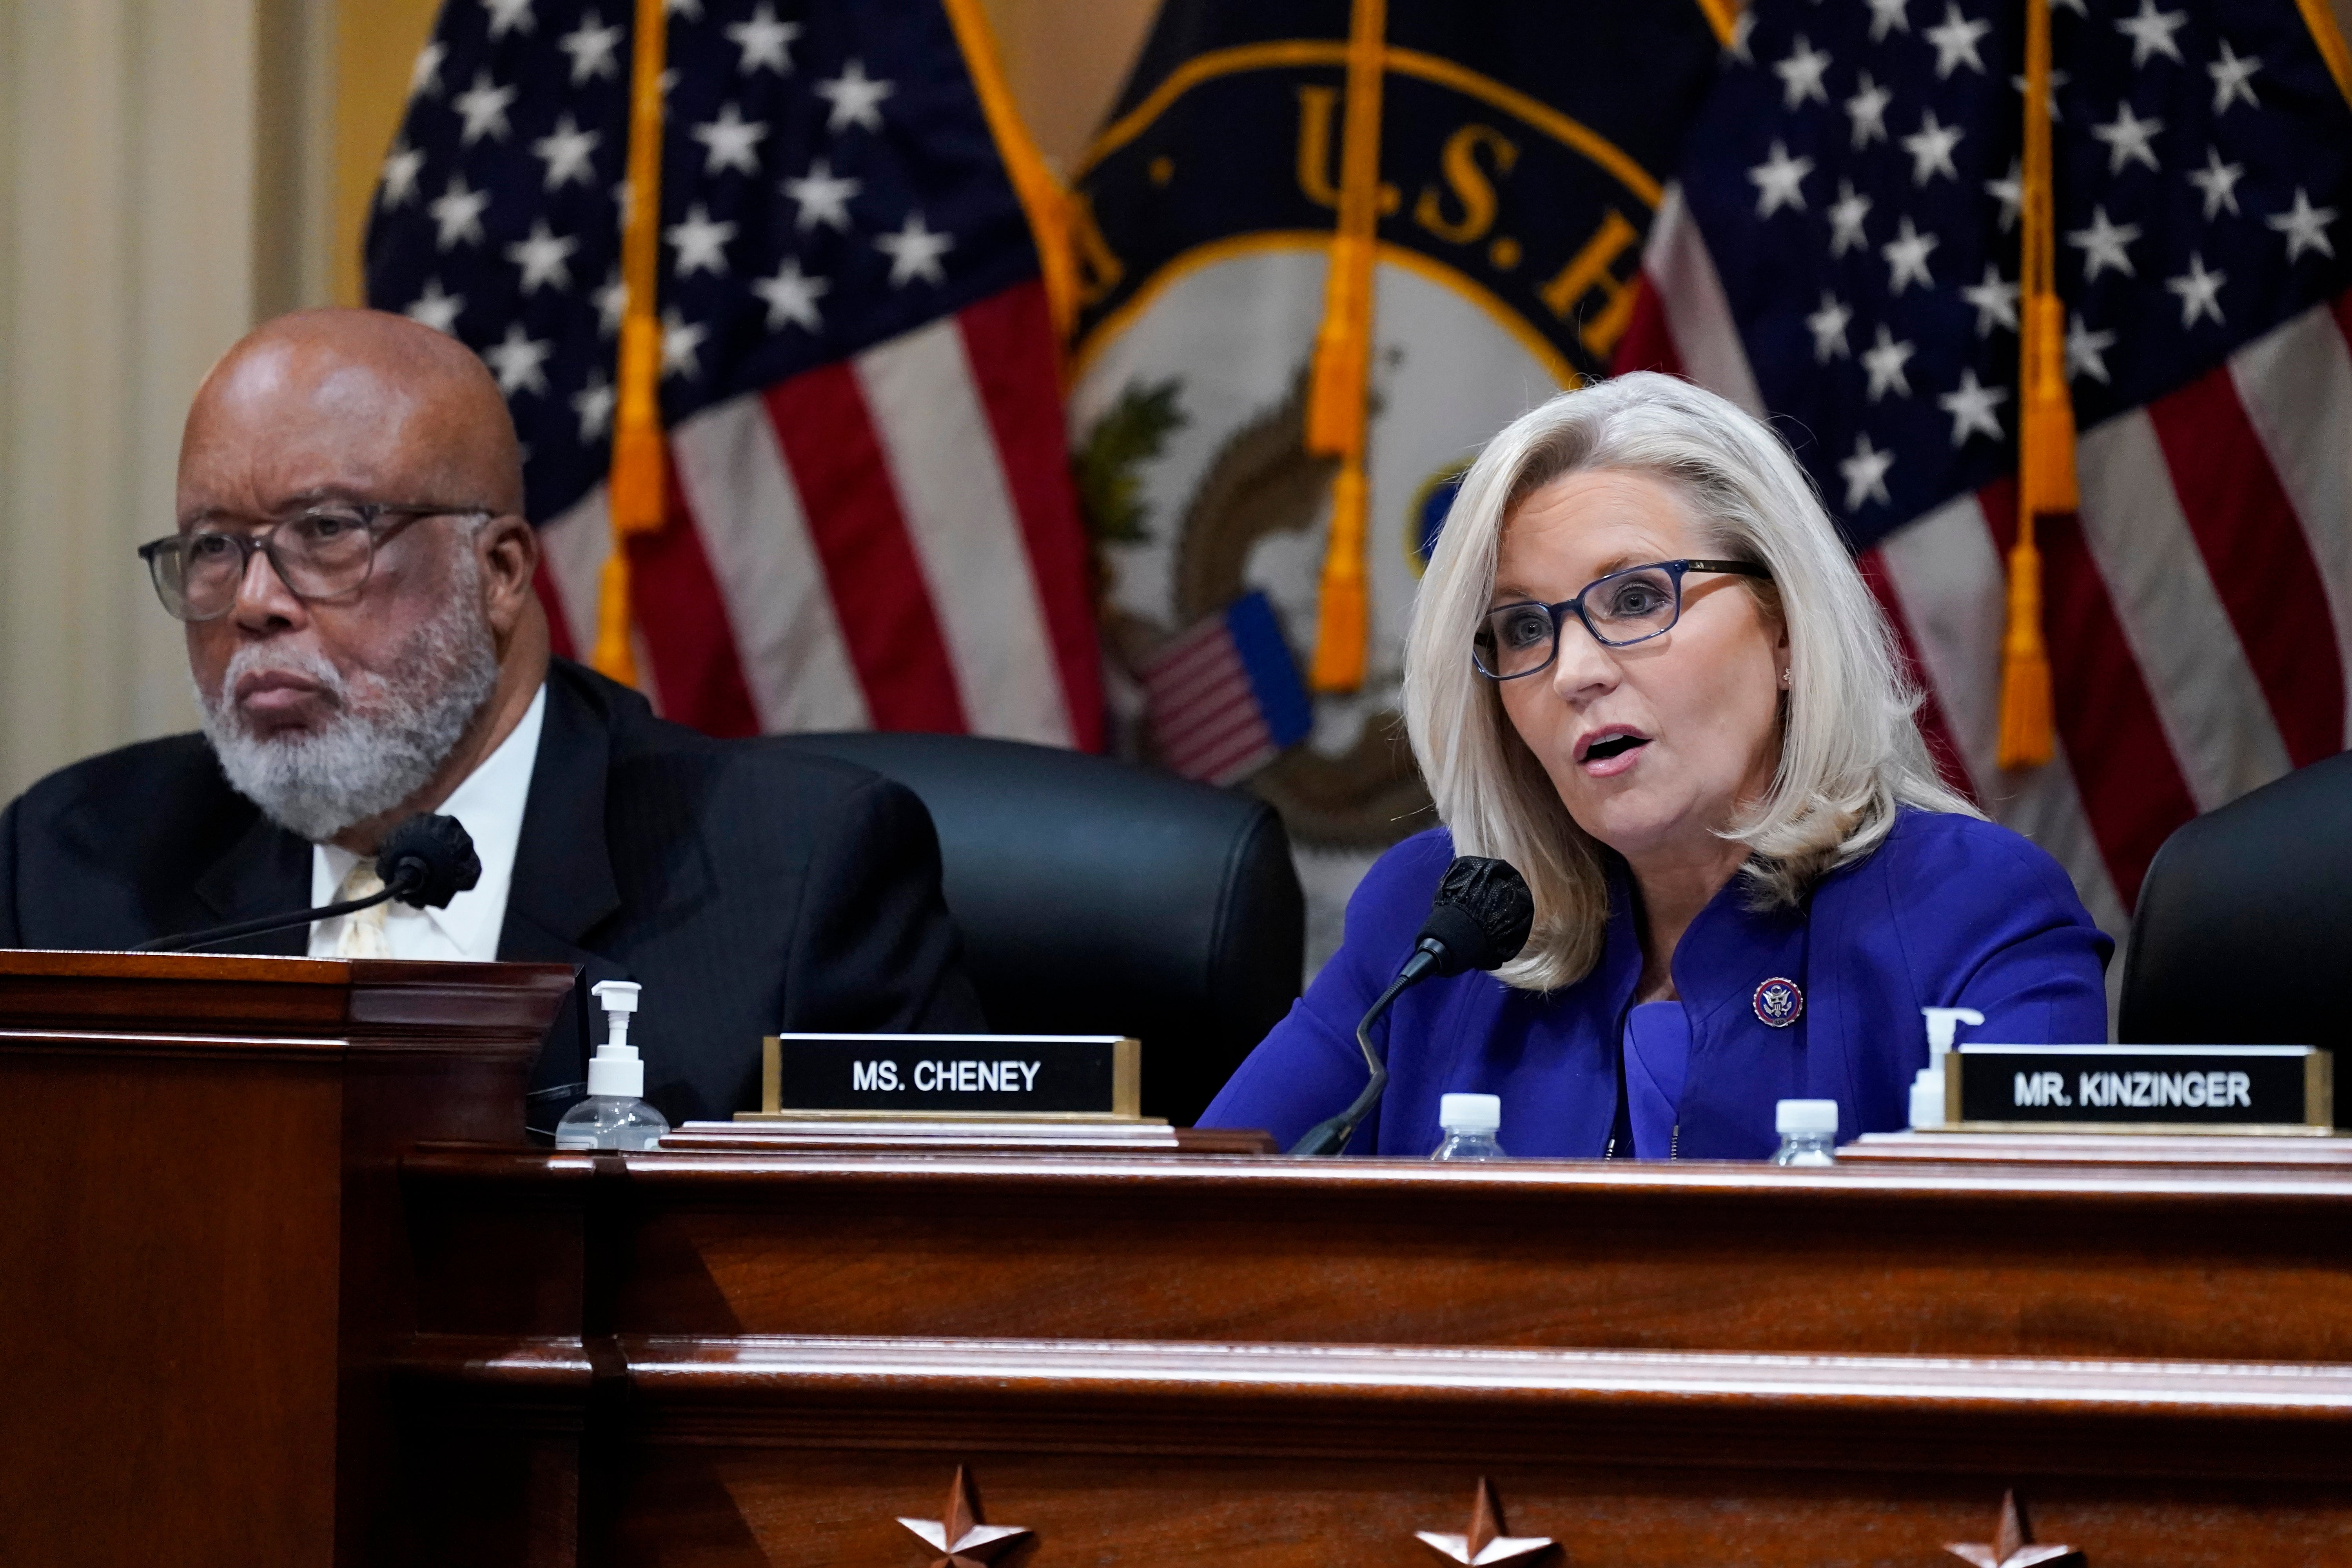 Committee Vice Chair Liz Cheney, R-Wyo., speaks as the House select committee investigating the Jan. 6 attack on the U.S. Capitol holds its final meeting on Capitol Hill in Washington, Monday, Dec. 19, 2022. Committee Chairman Bennie Thompson, D-Miss., left.